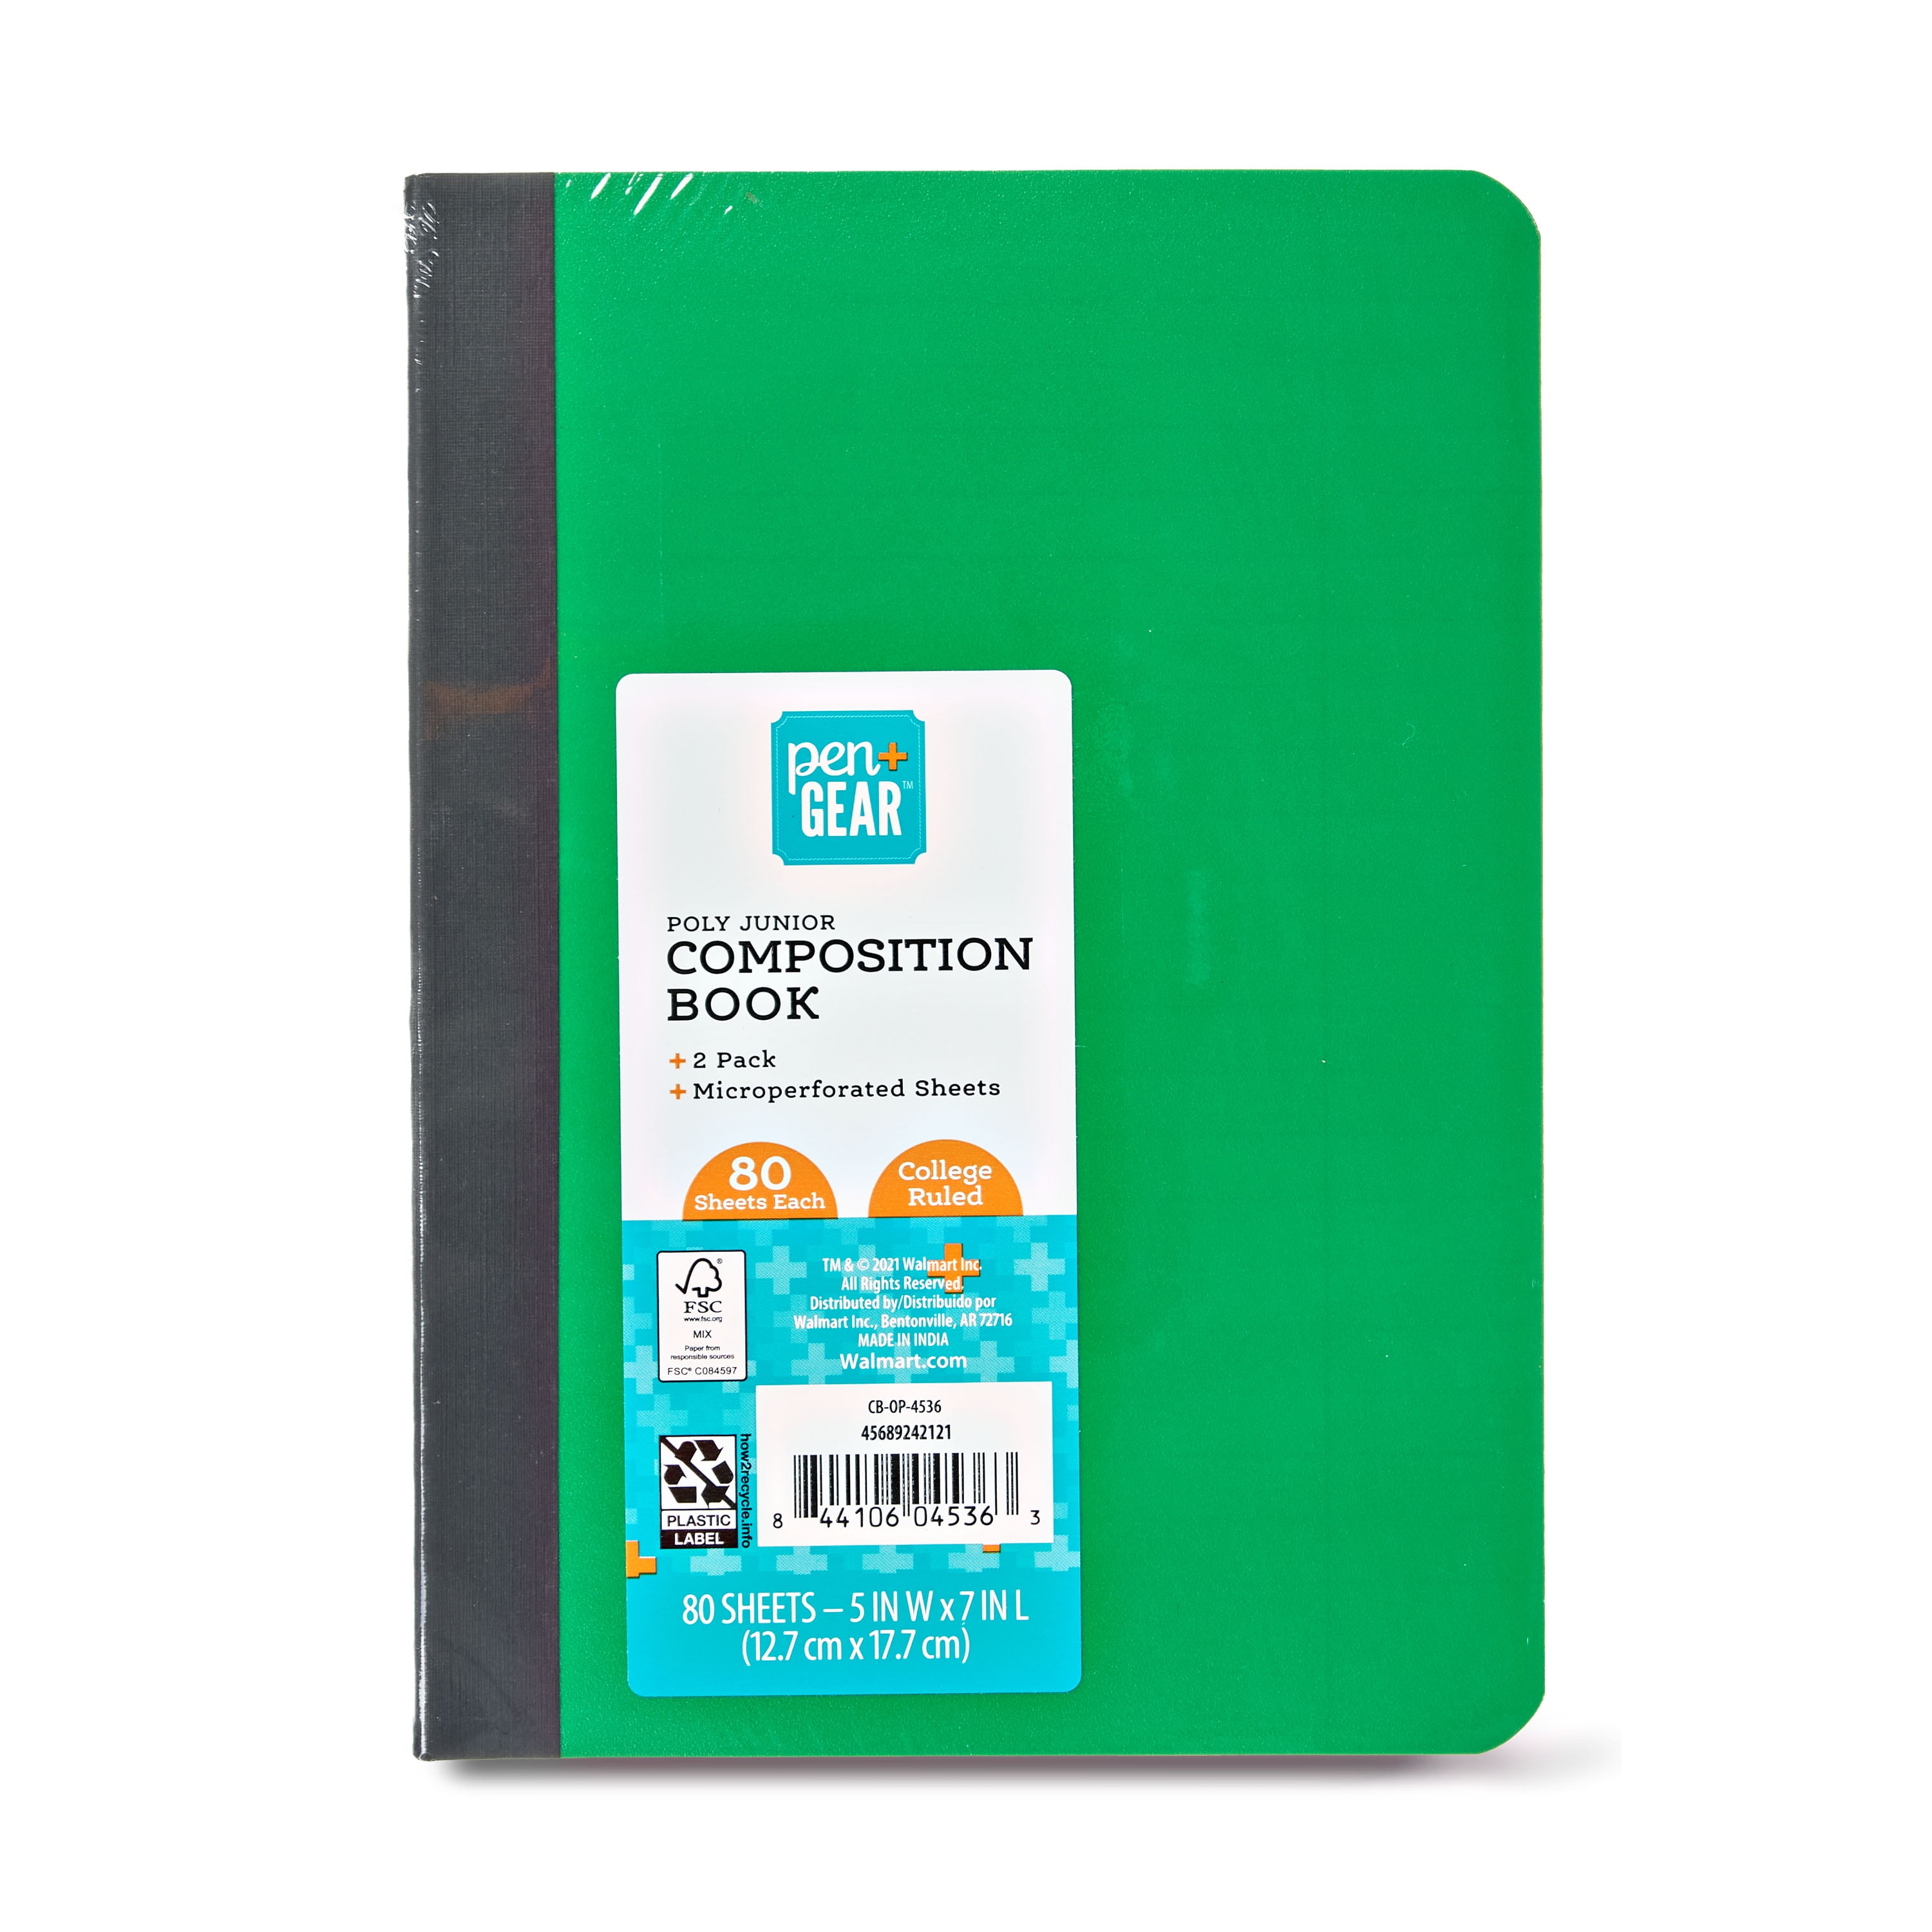 Pen+Gear Poly Junior Composition Book, 5"X7", College Ruled, 80 Sheets, 2 Count